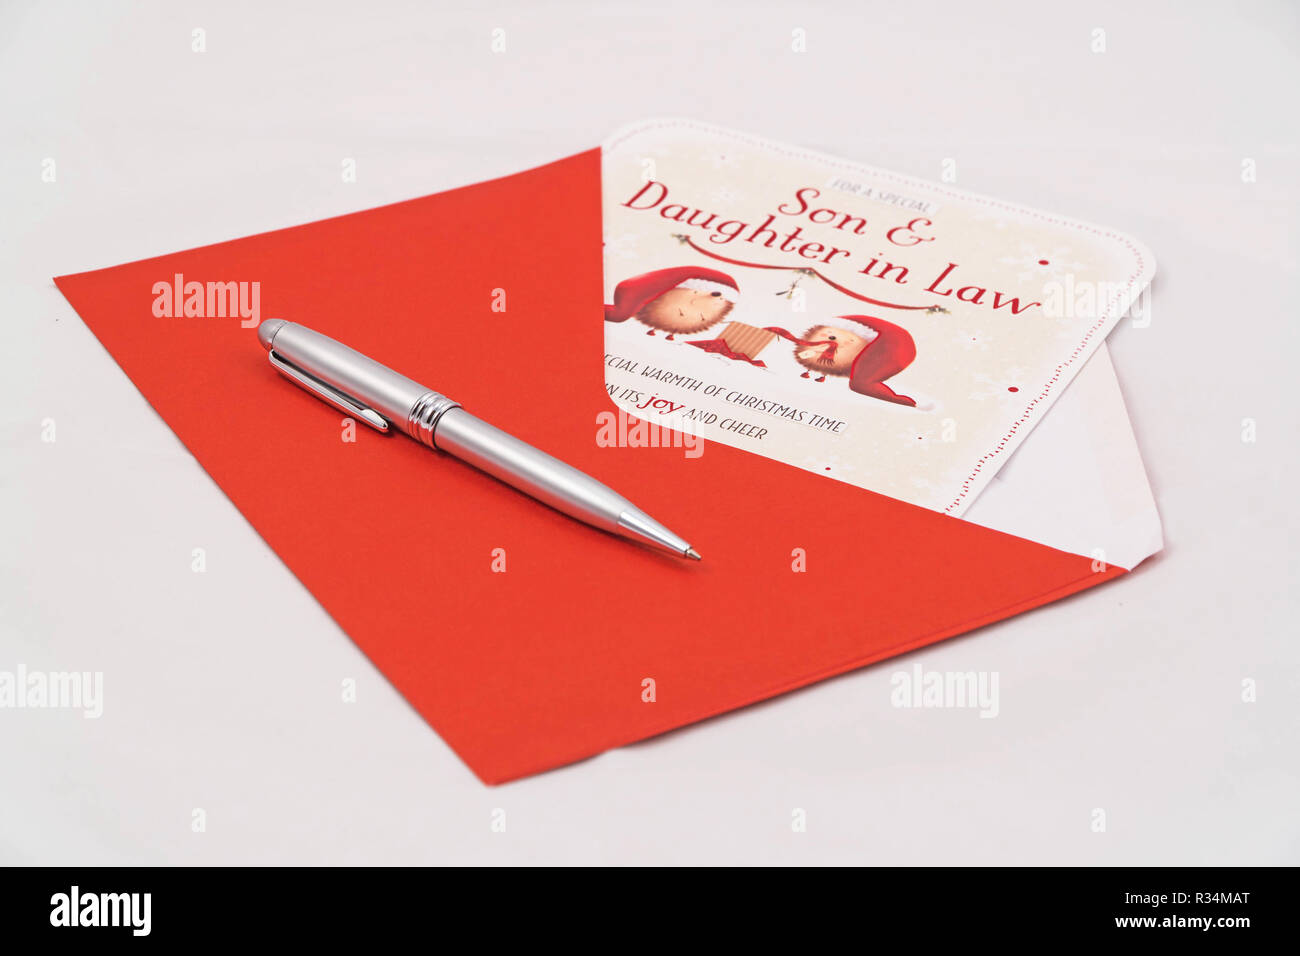 Christmas card for Son and Daughter in Law with red envelope and pen on white background Stock Photo